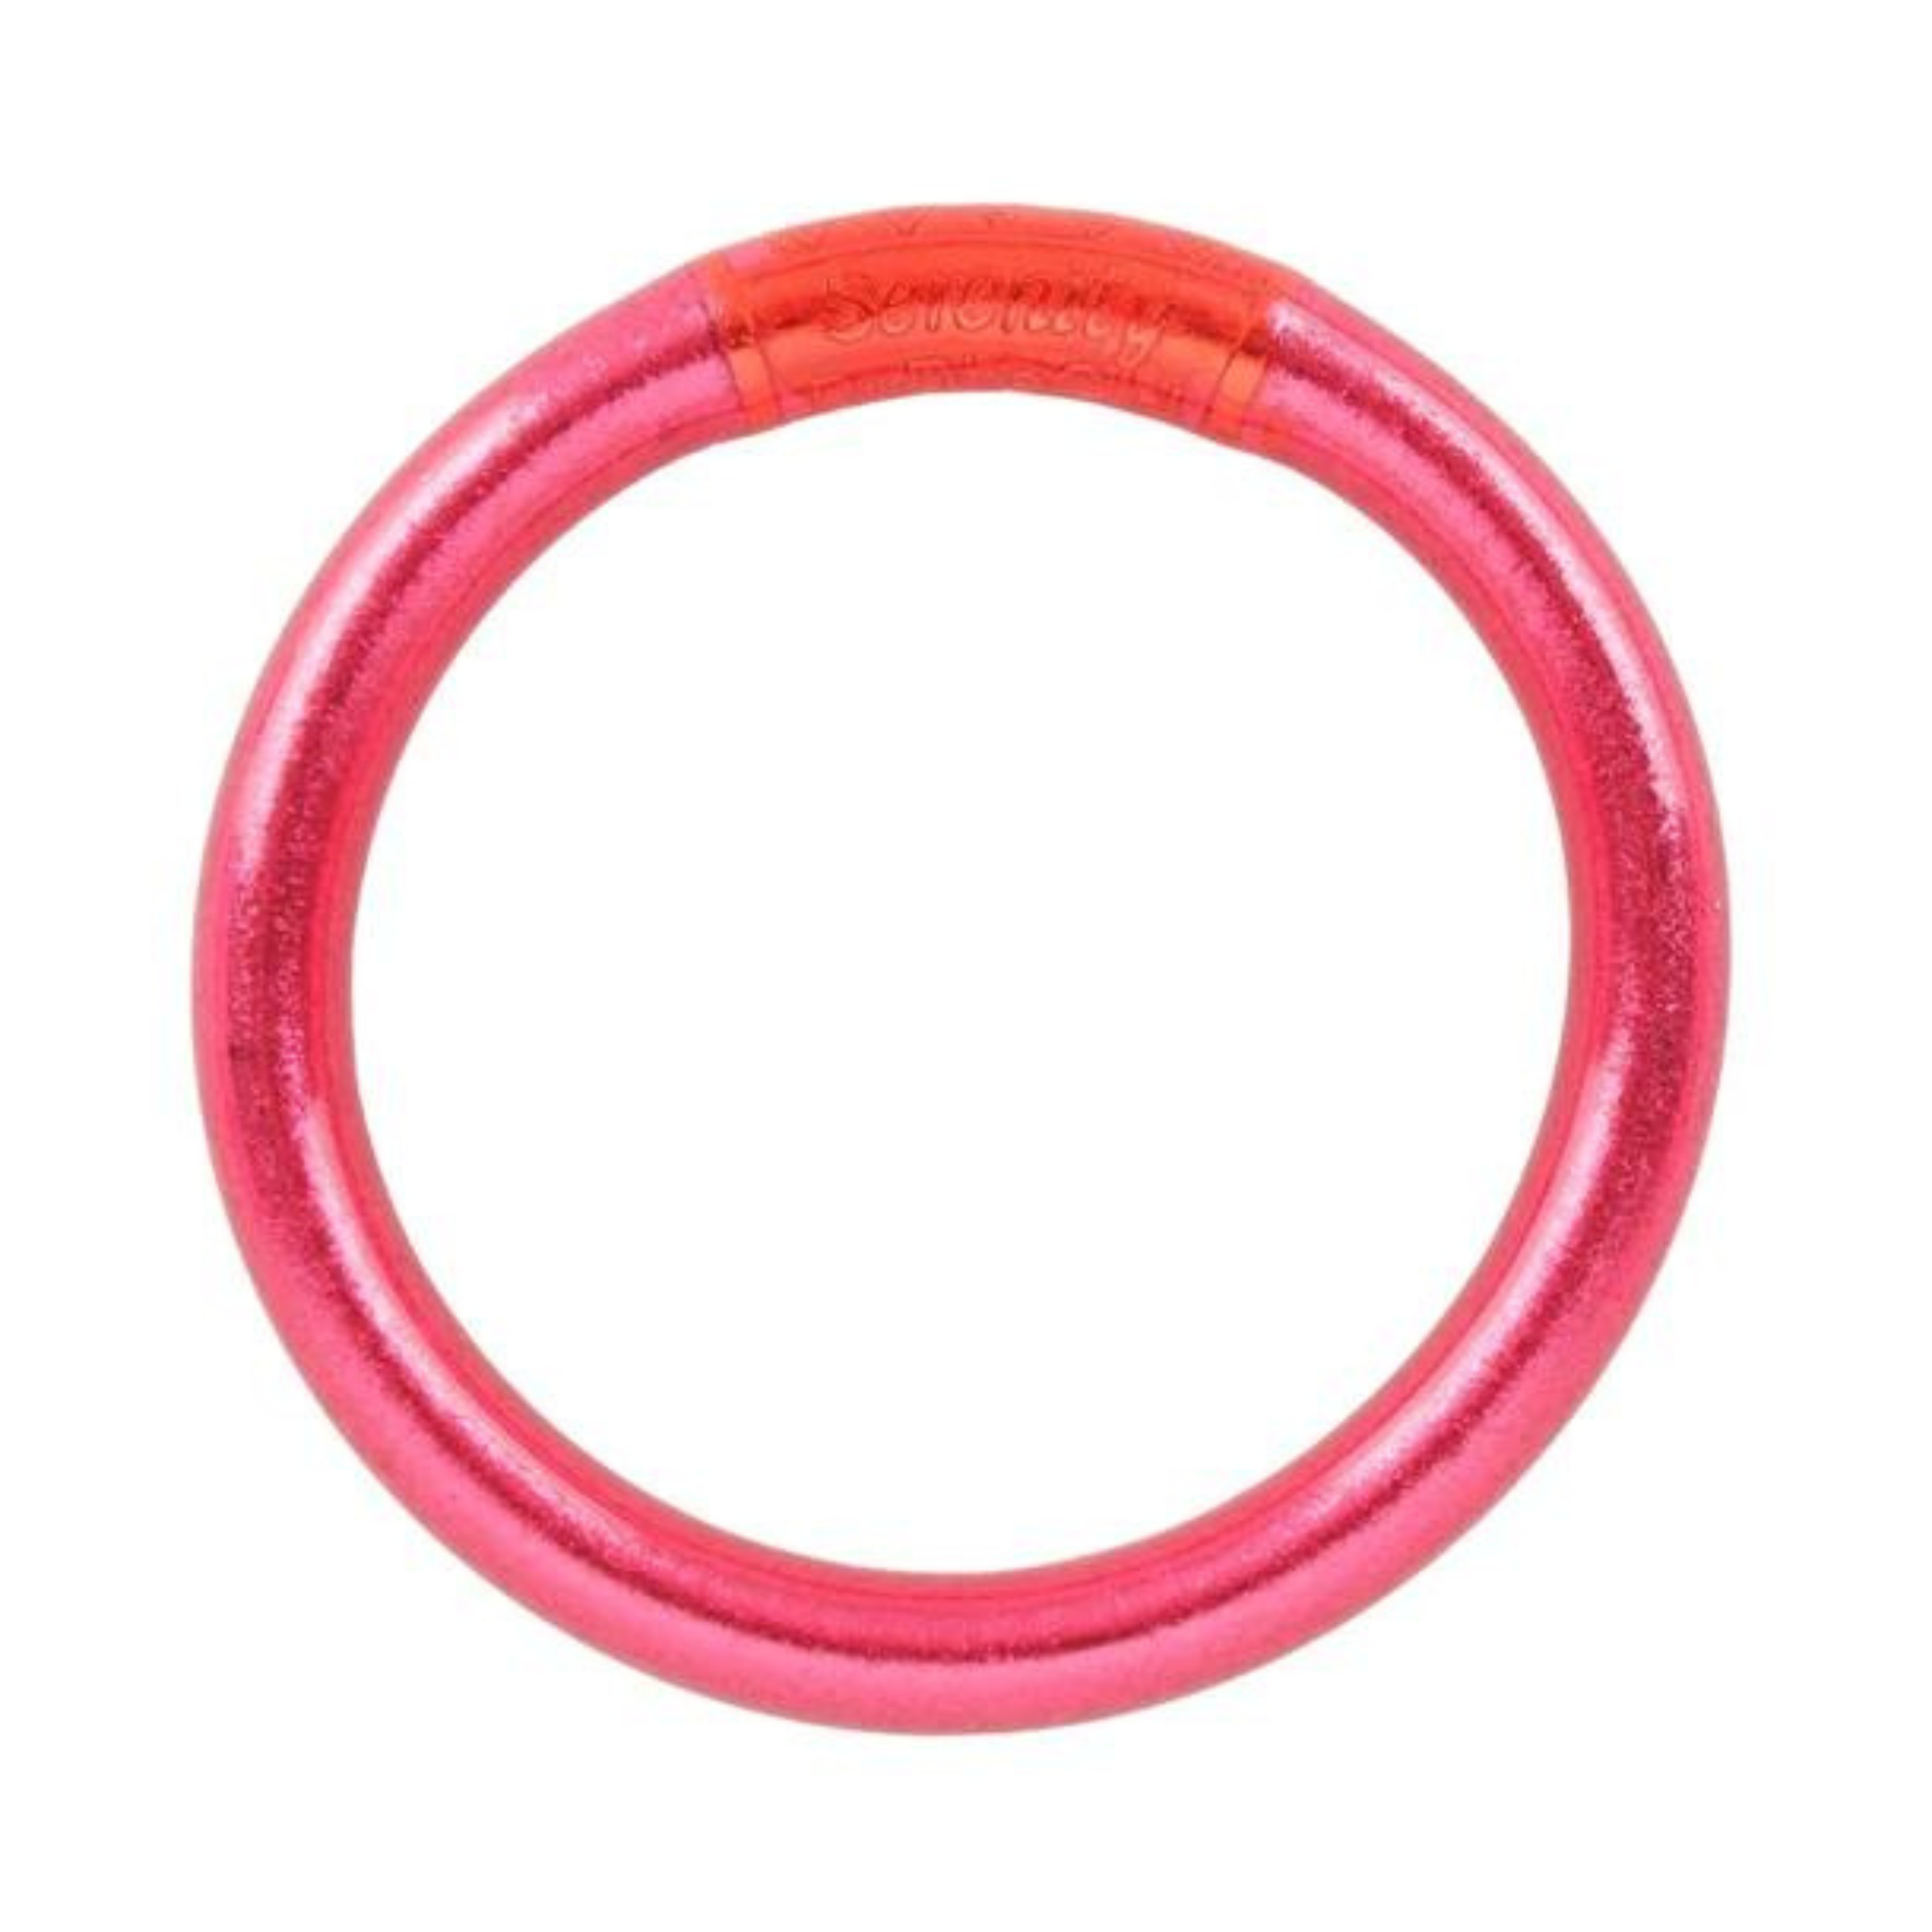 BuDhaGirl | Tzubbie All Weather Bangle in BDG Pink - Giddy Up Glamour Boutique